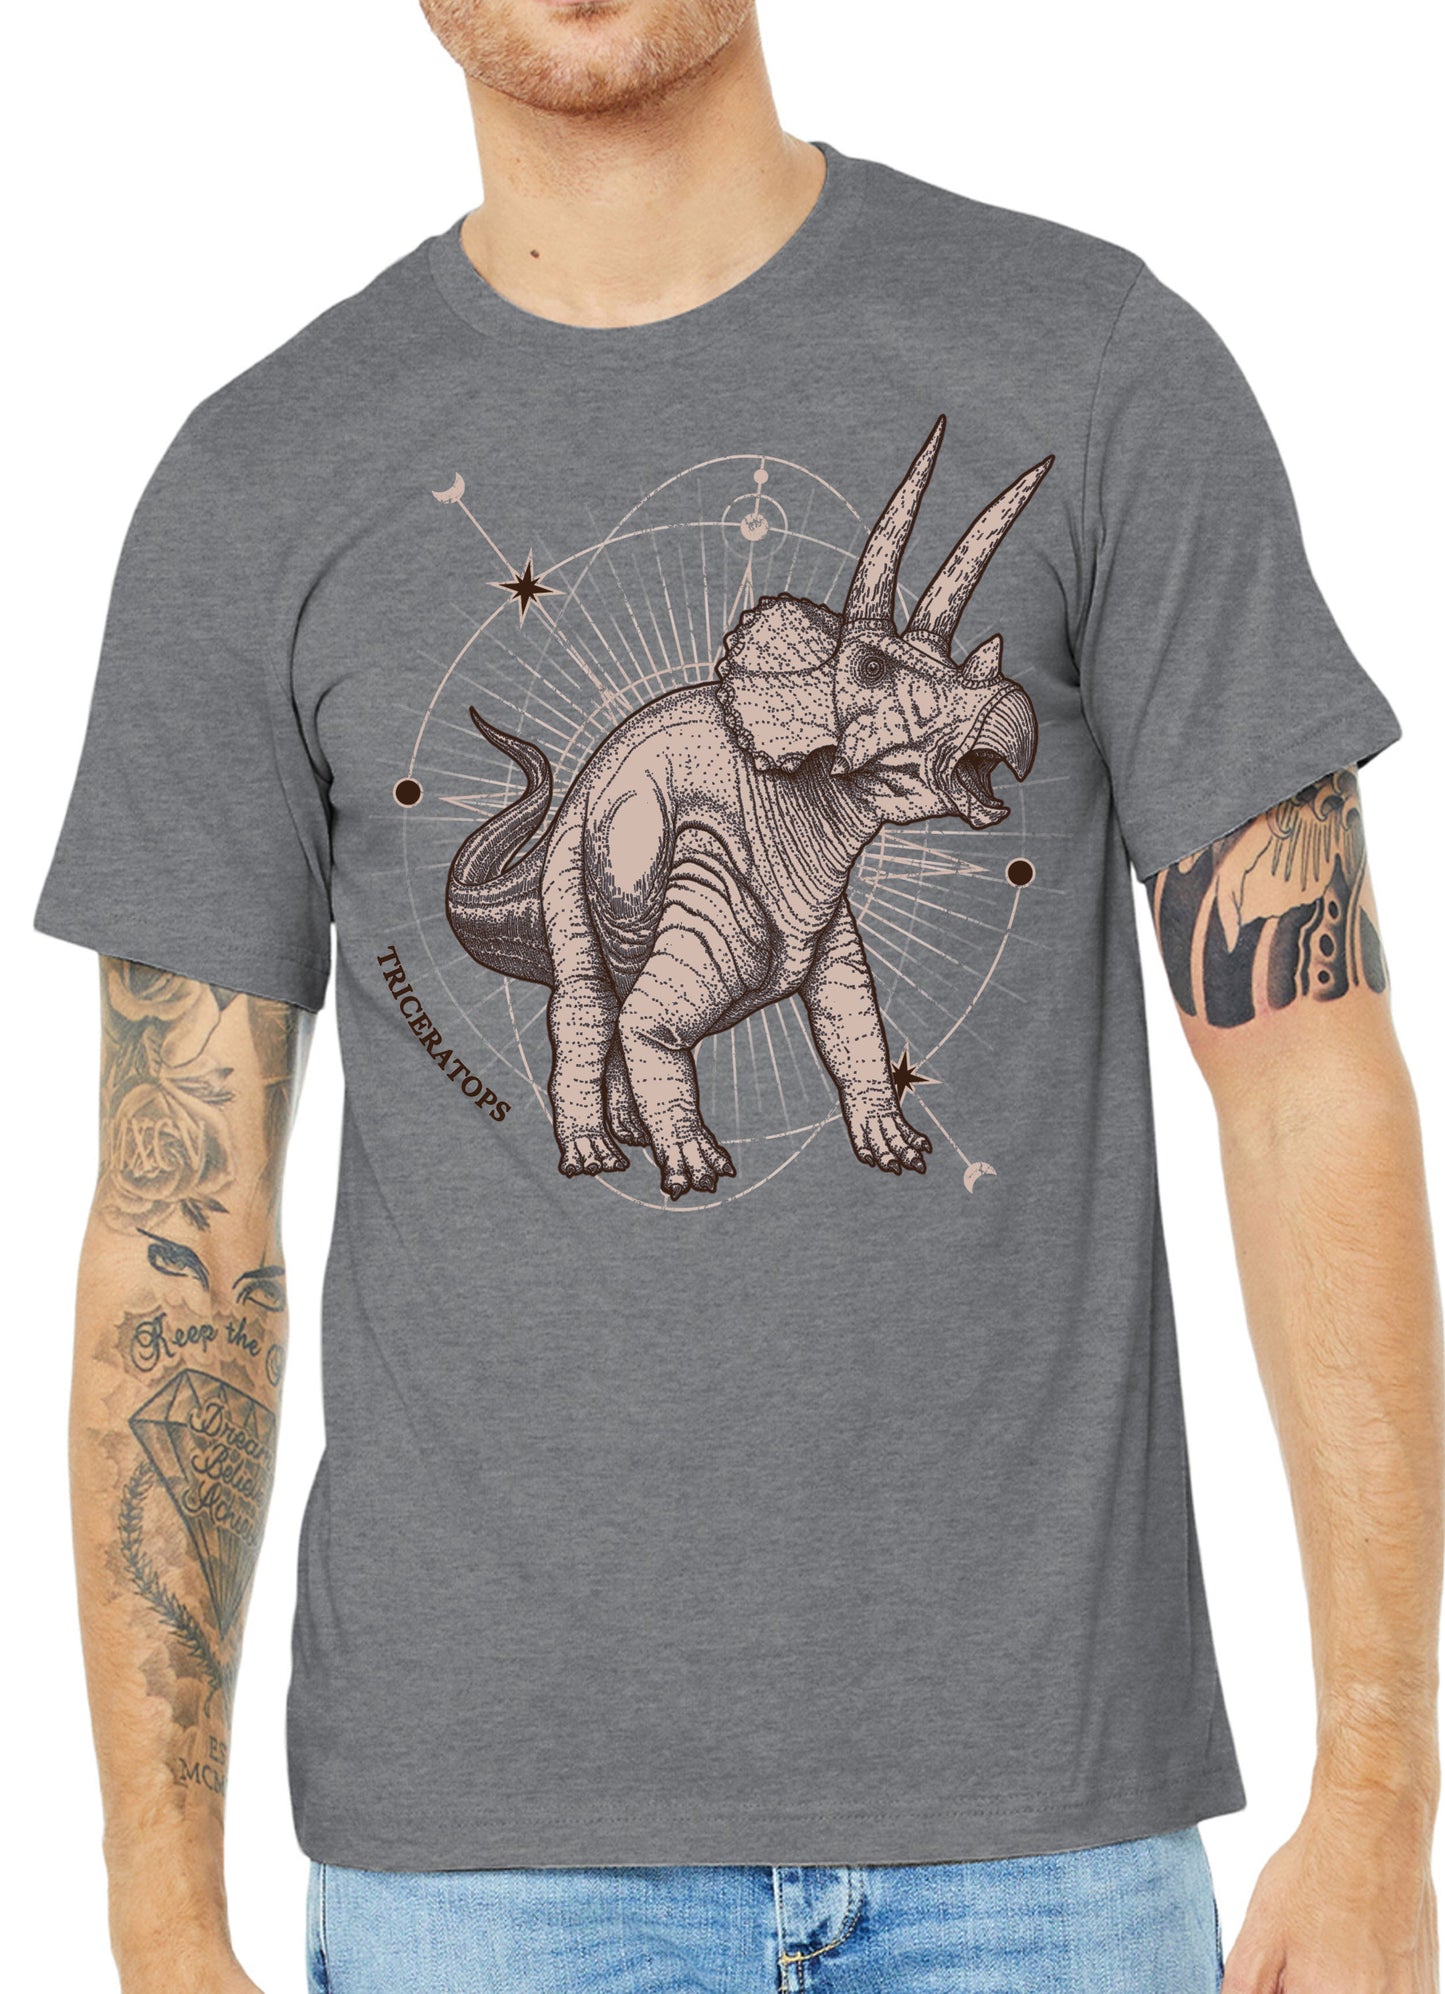 Triceratops, Triceratops shirt, graphic tee